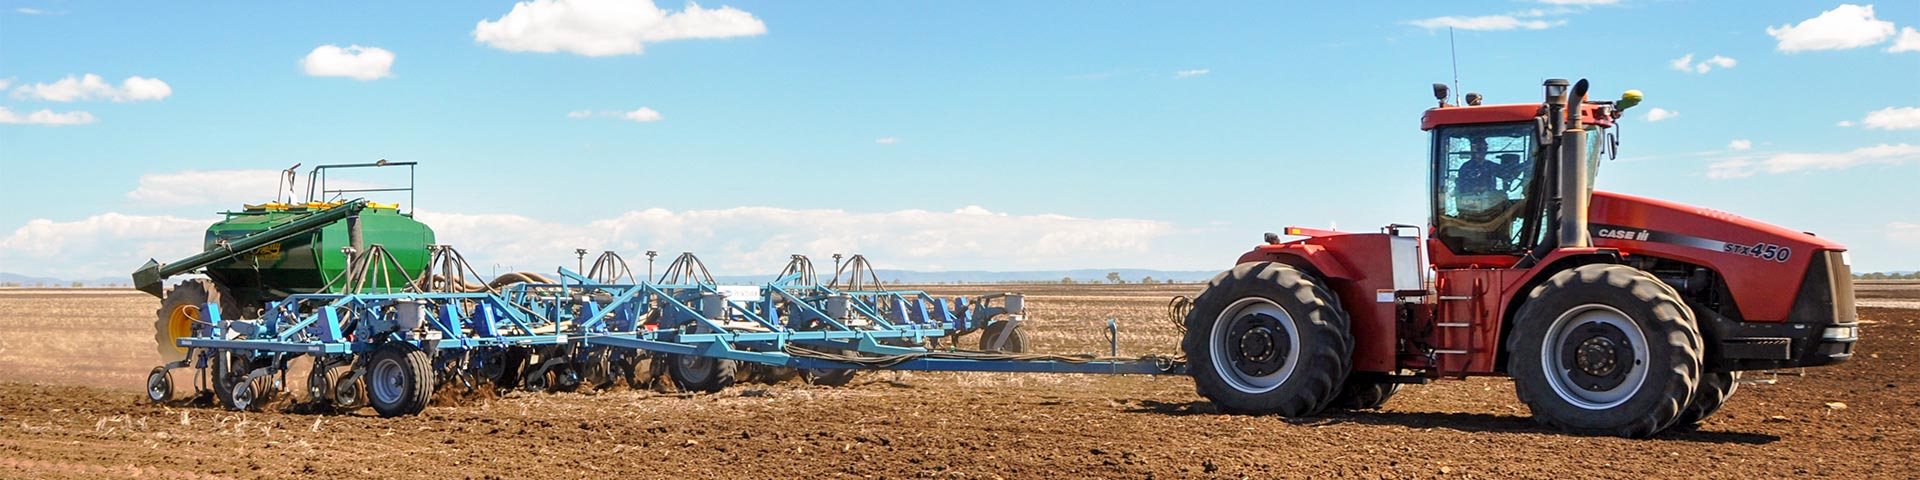 Agricultural Consignment Machinery examples